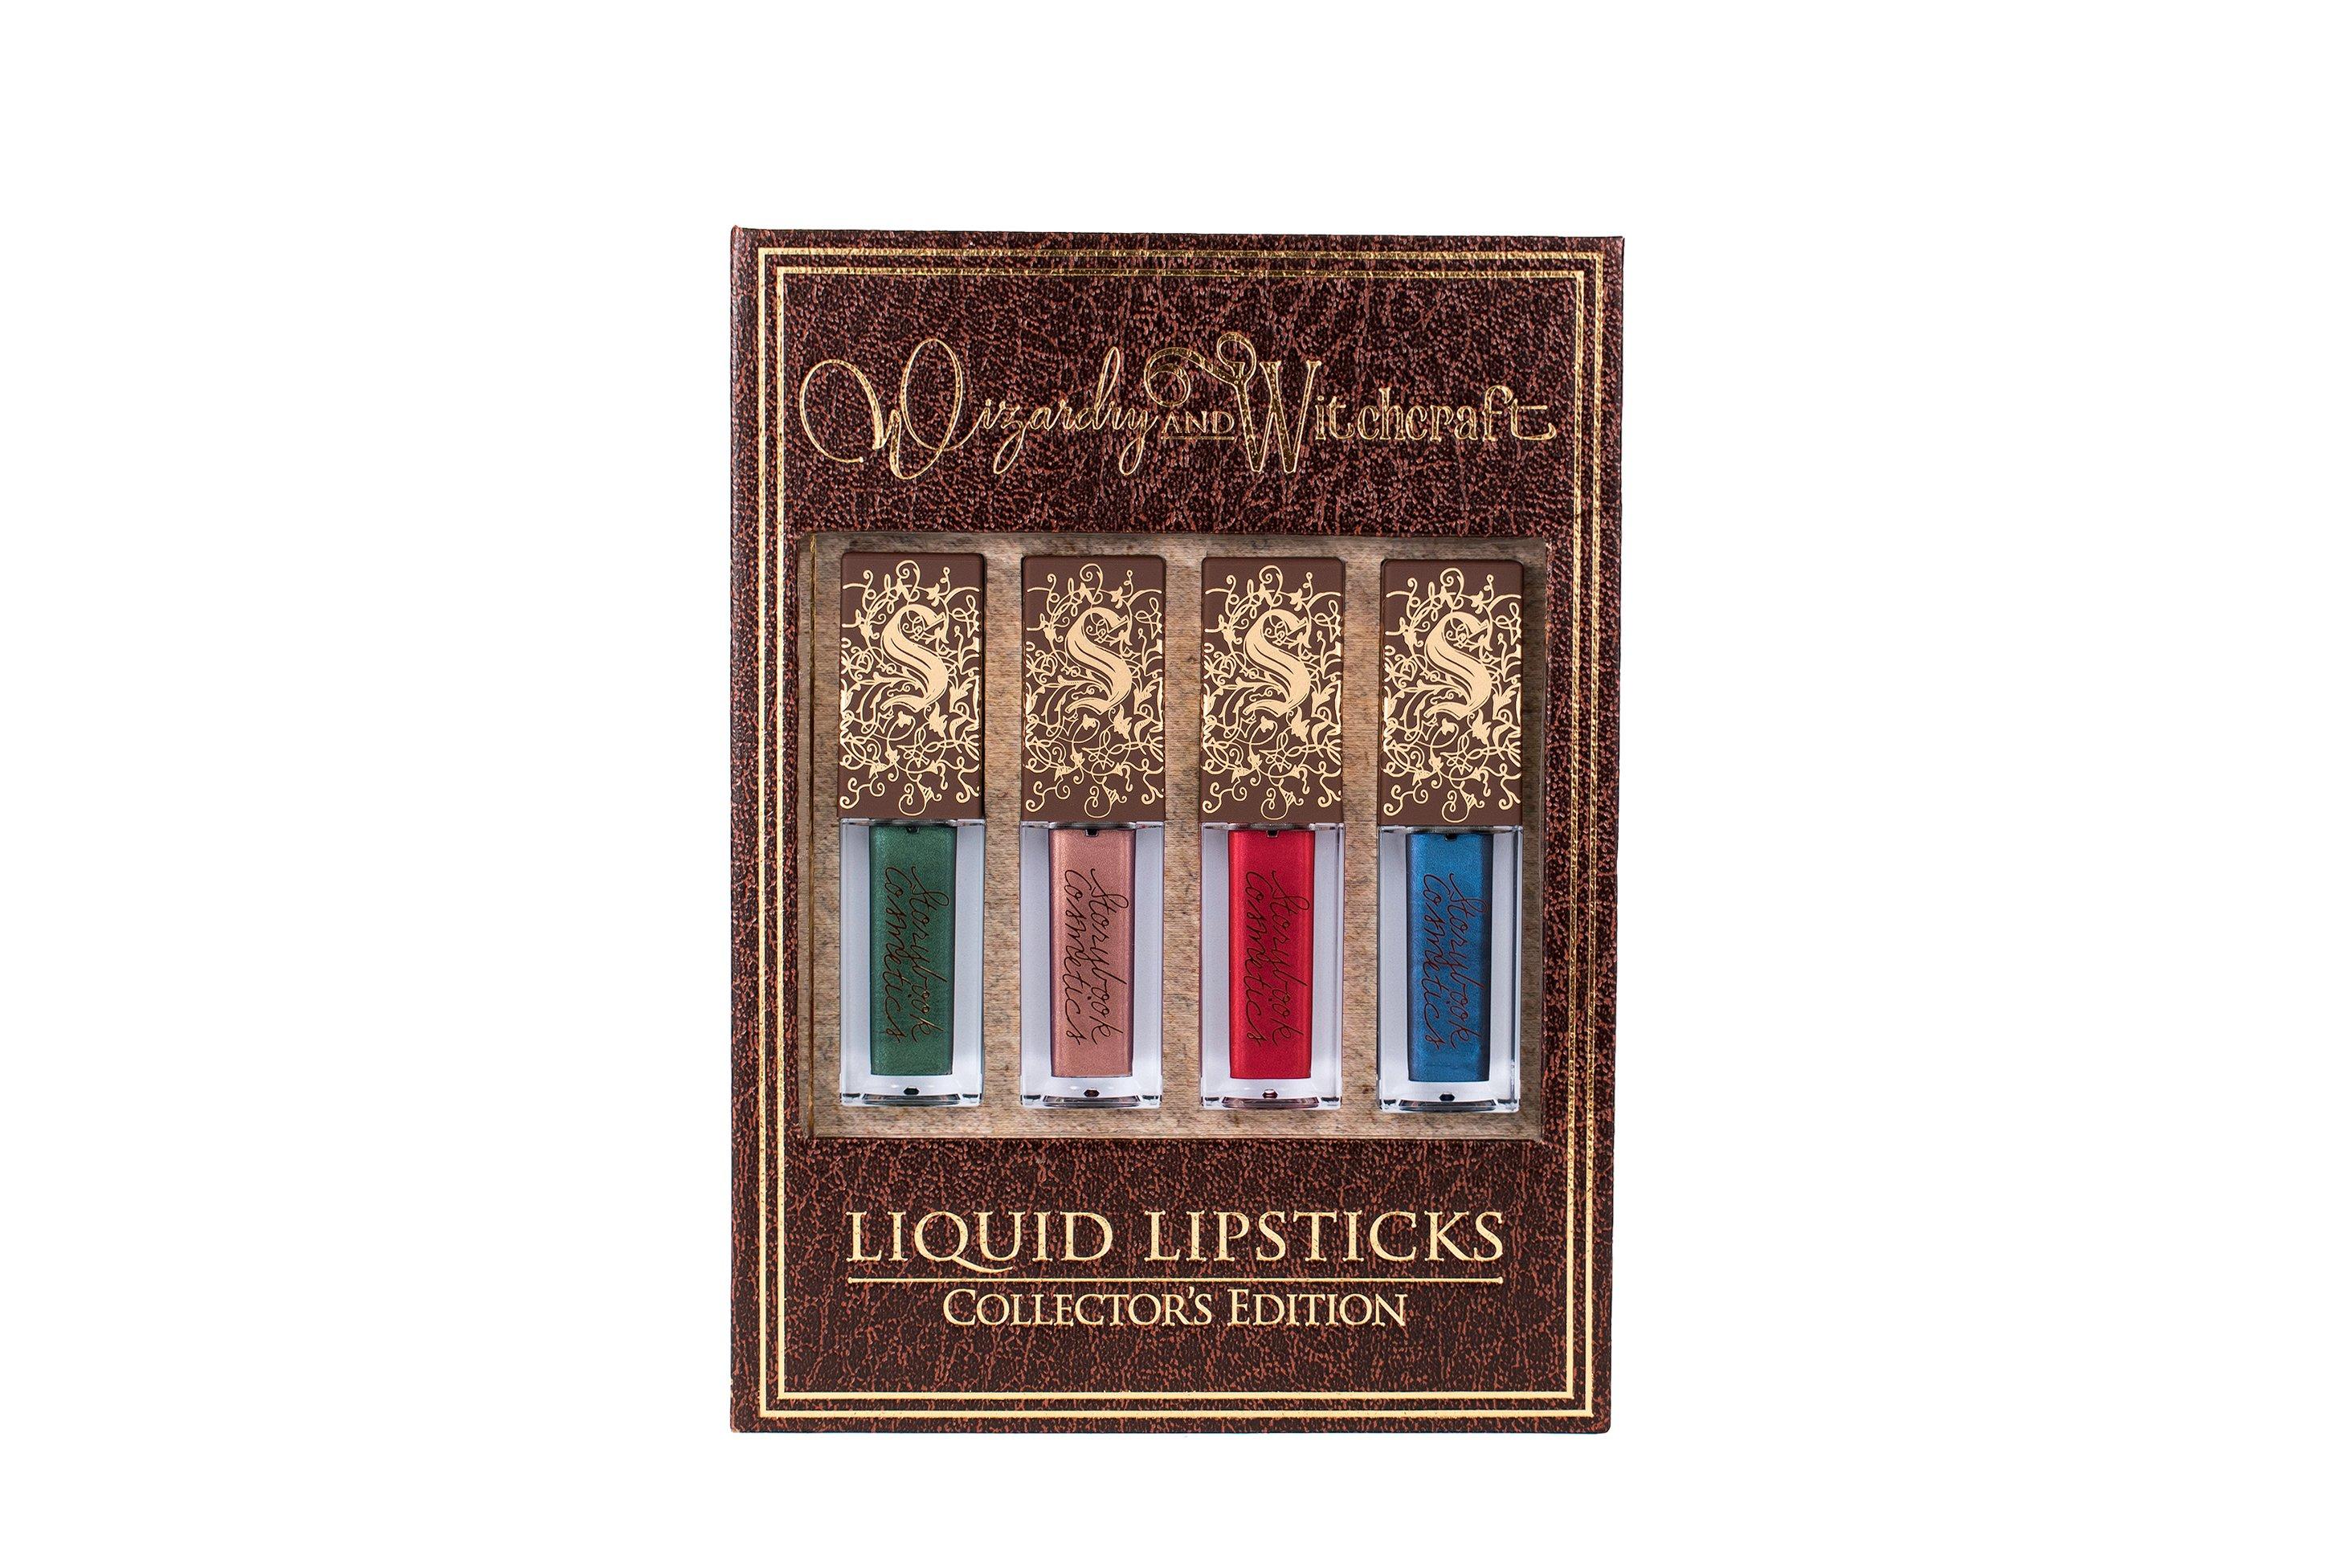 Storybook Cosmetics Wizardry and Witchcraft Liquid Lipsticks Collector's Edition